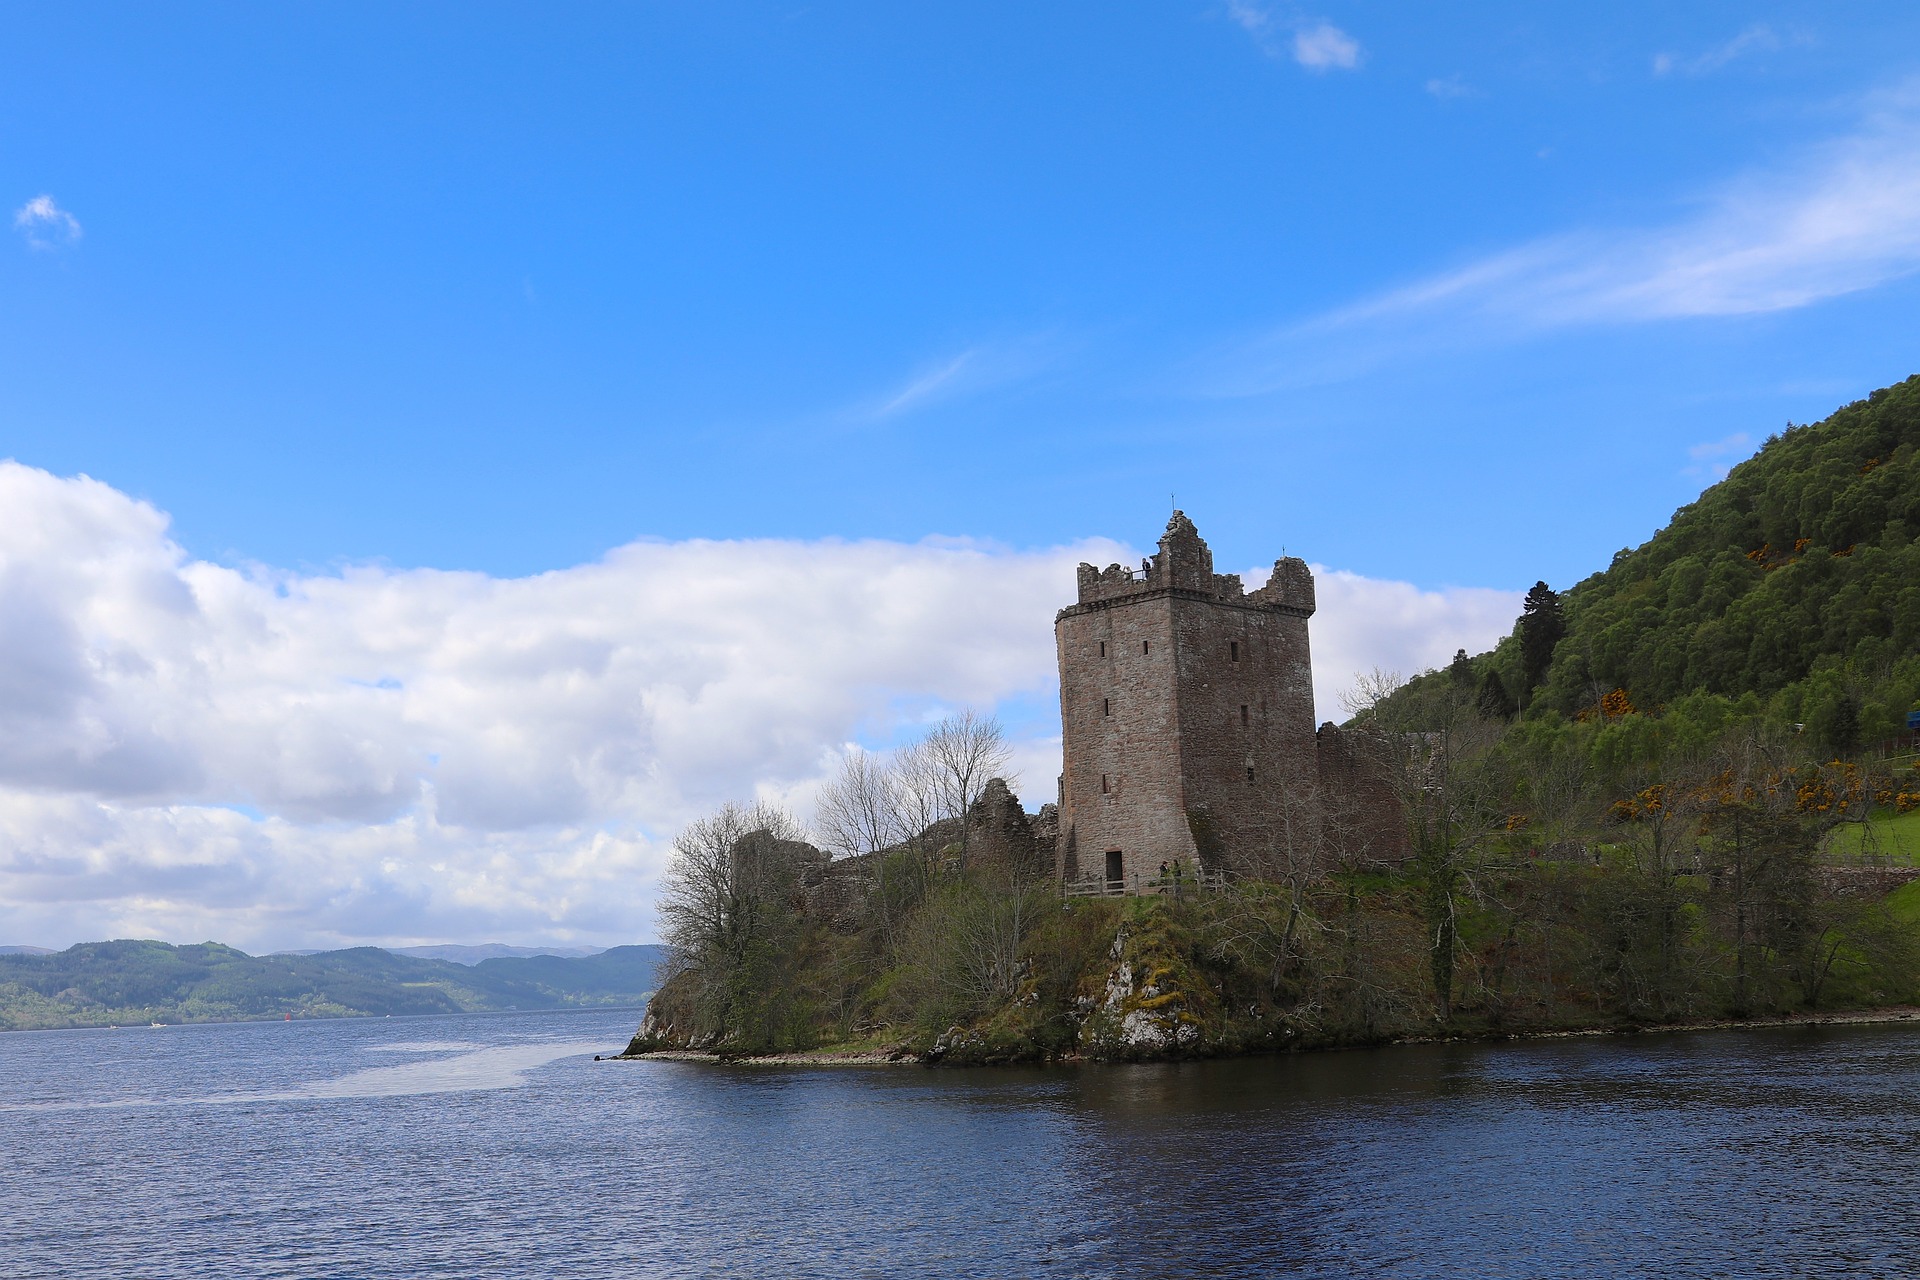 Loch Ness: Day 3 of your 7 day Scotland Road Trip